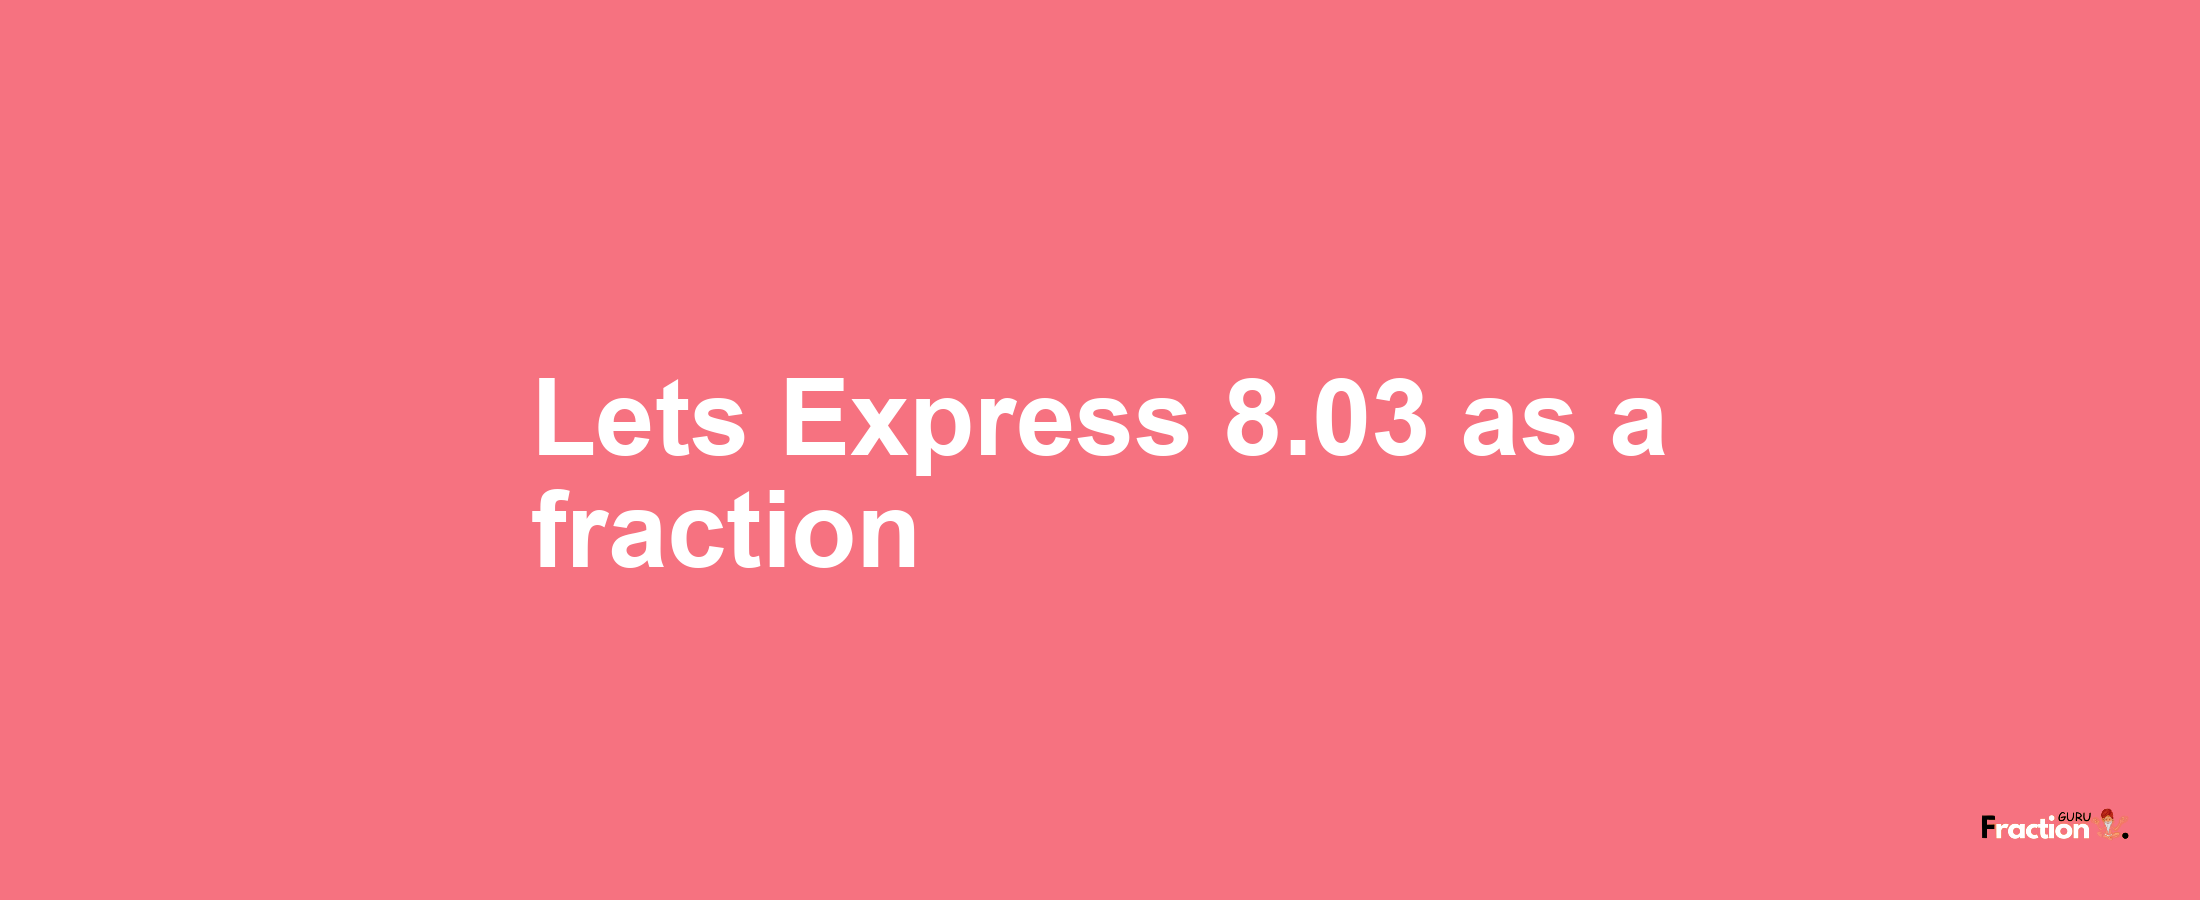 Lets Express 8.03 as afraction